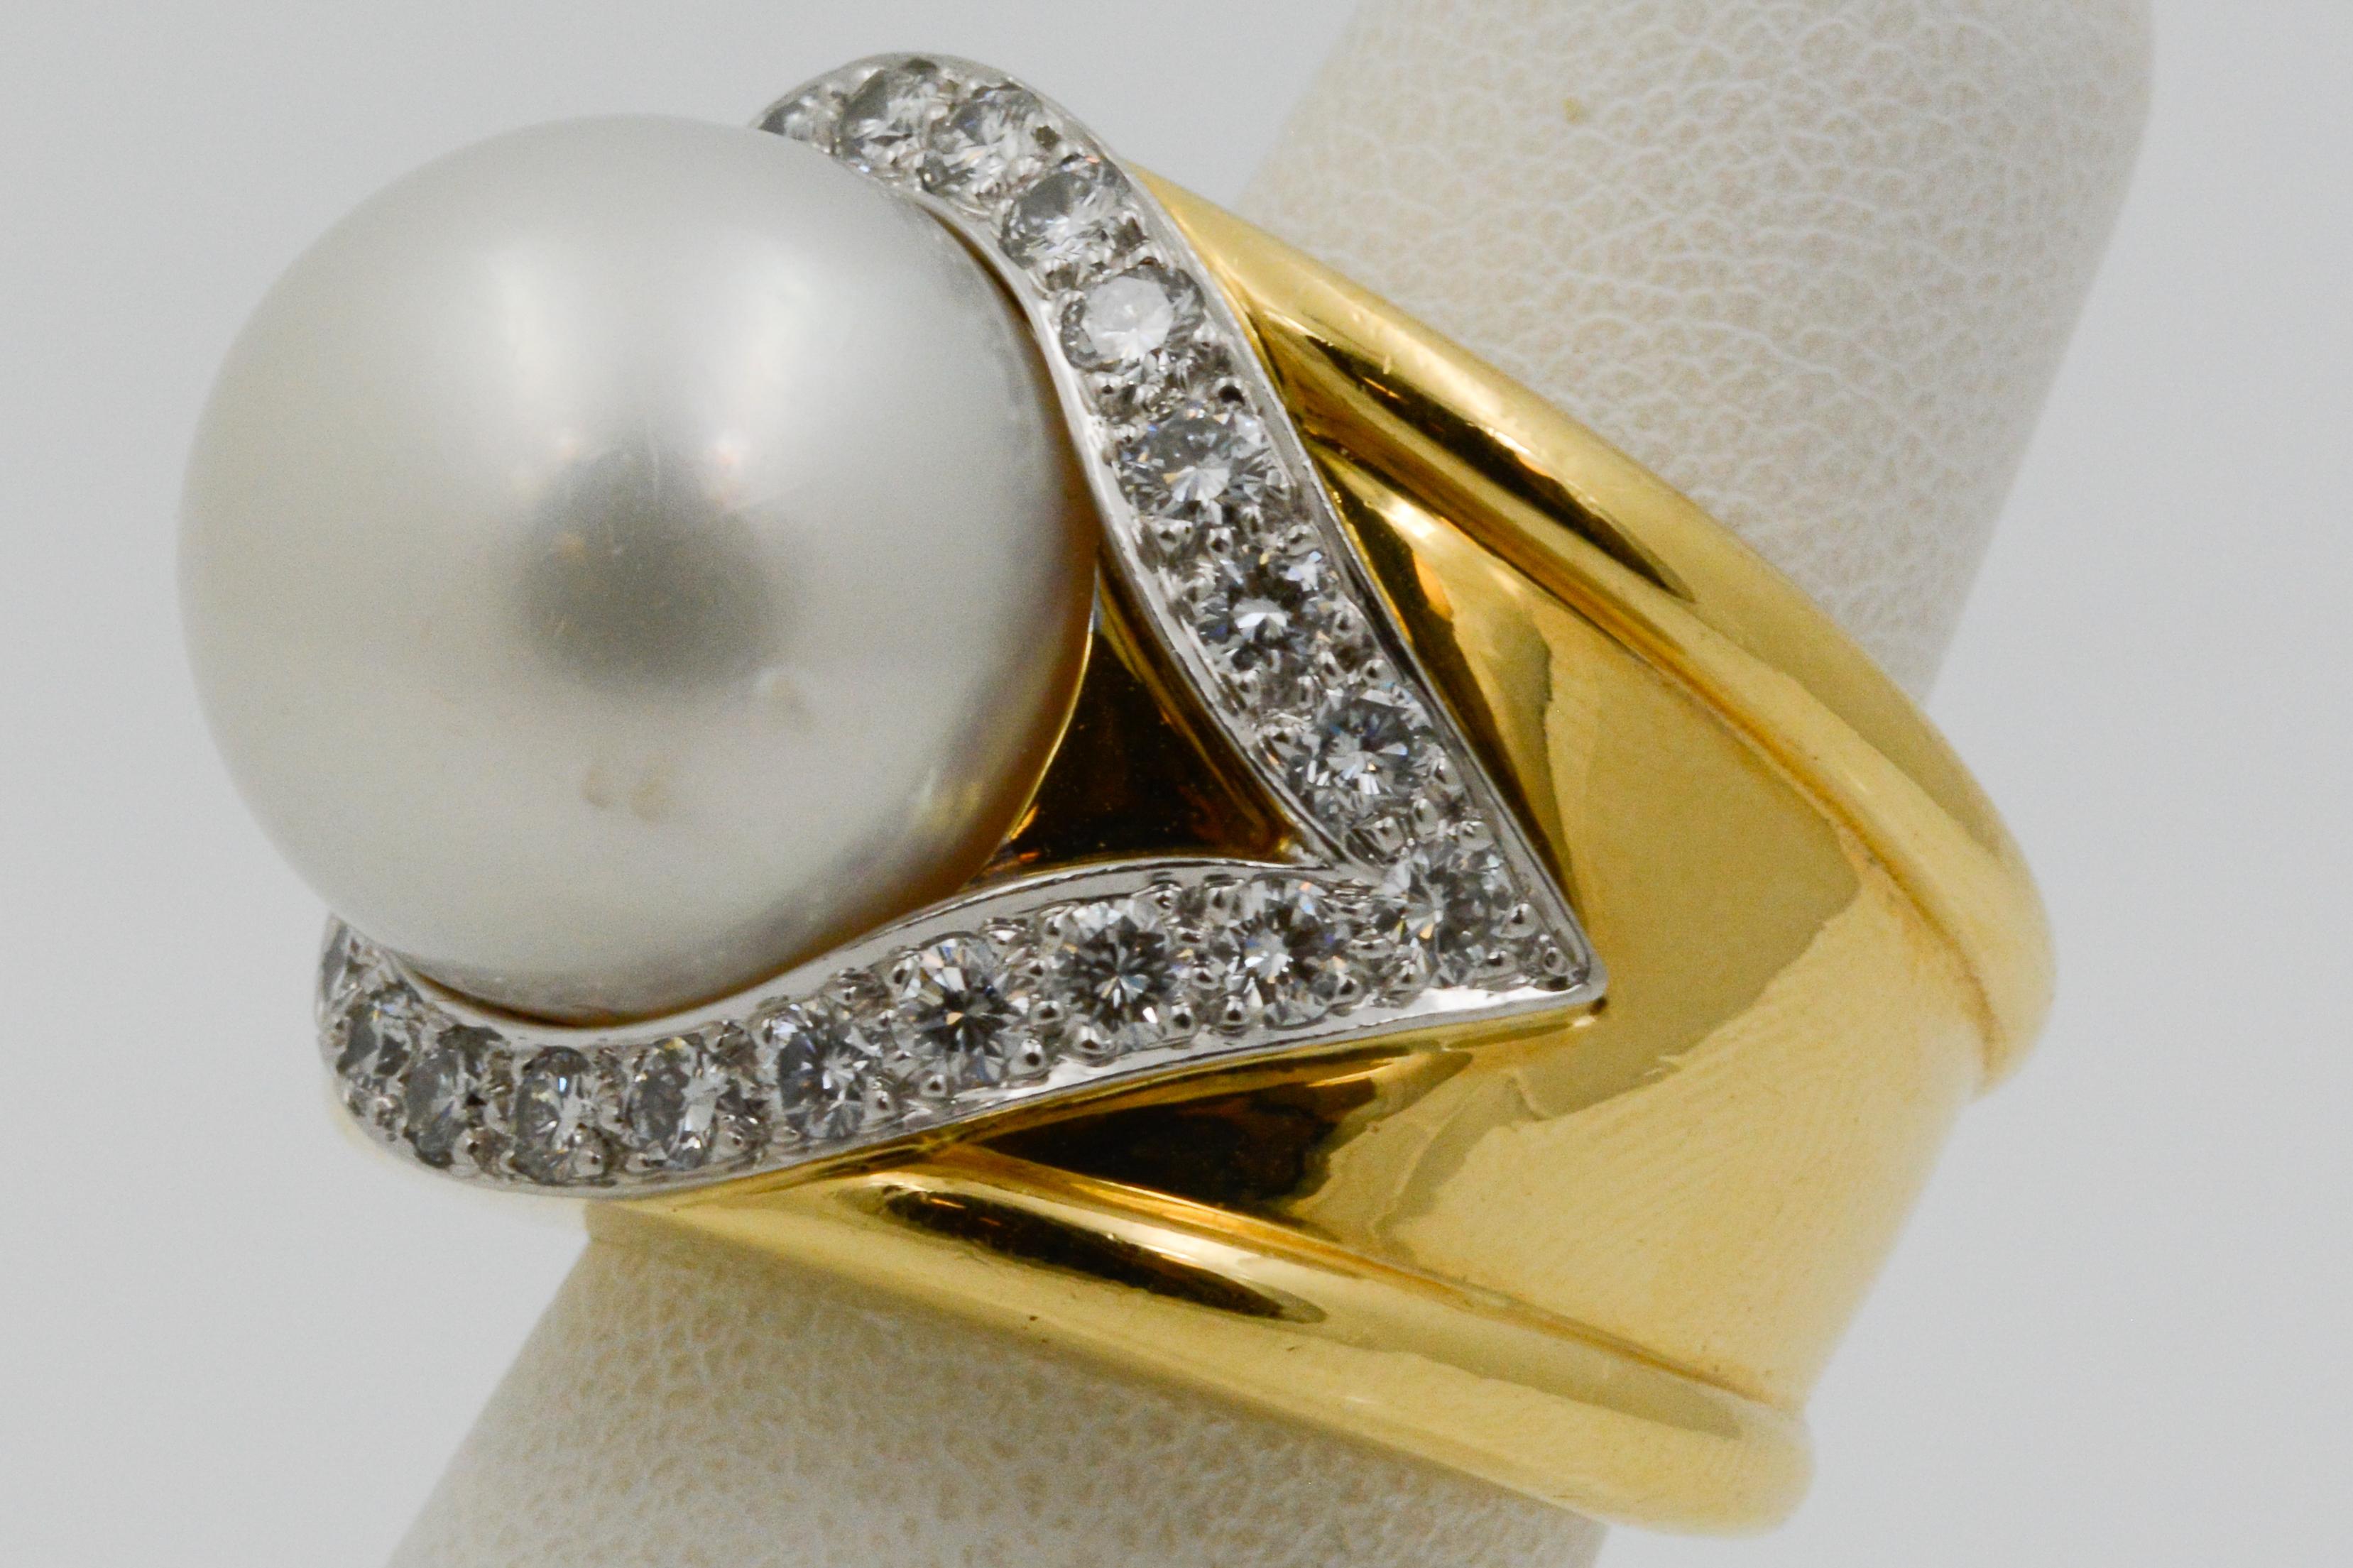 This David Webb ring is 18K yellow gold and platinum with a geometric design; set 14.85mm South Sea pearl and 1.00ctw round brilliant 24 diamonds (G color and VS clarity). Expertly set in a teardrop halo surrounding the pearl. Ring comes in size 4.5